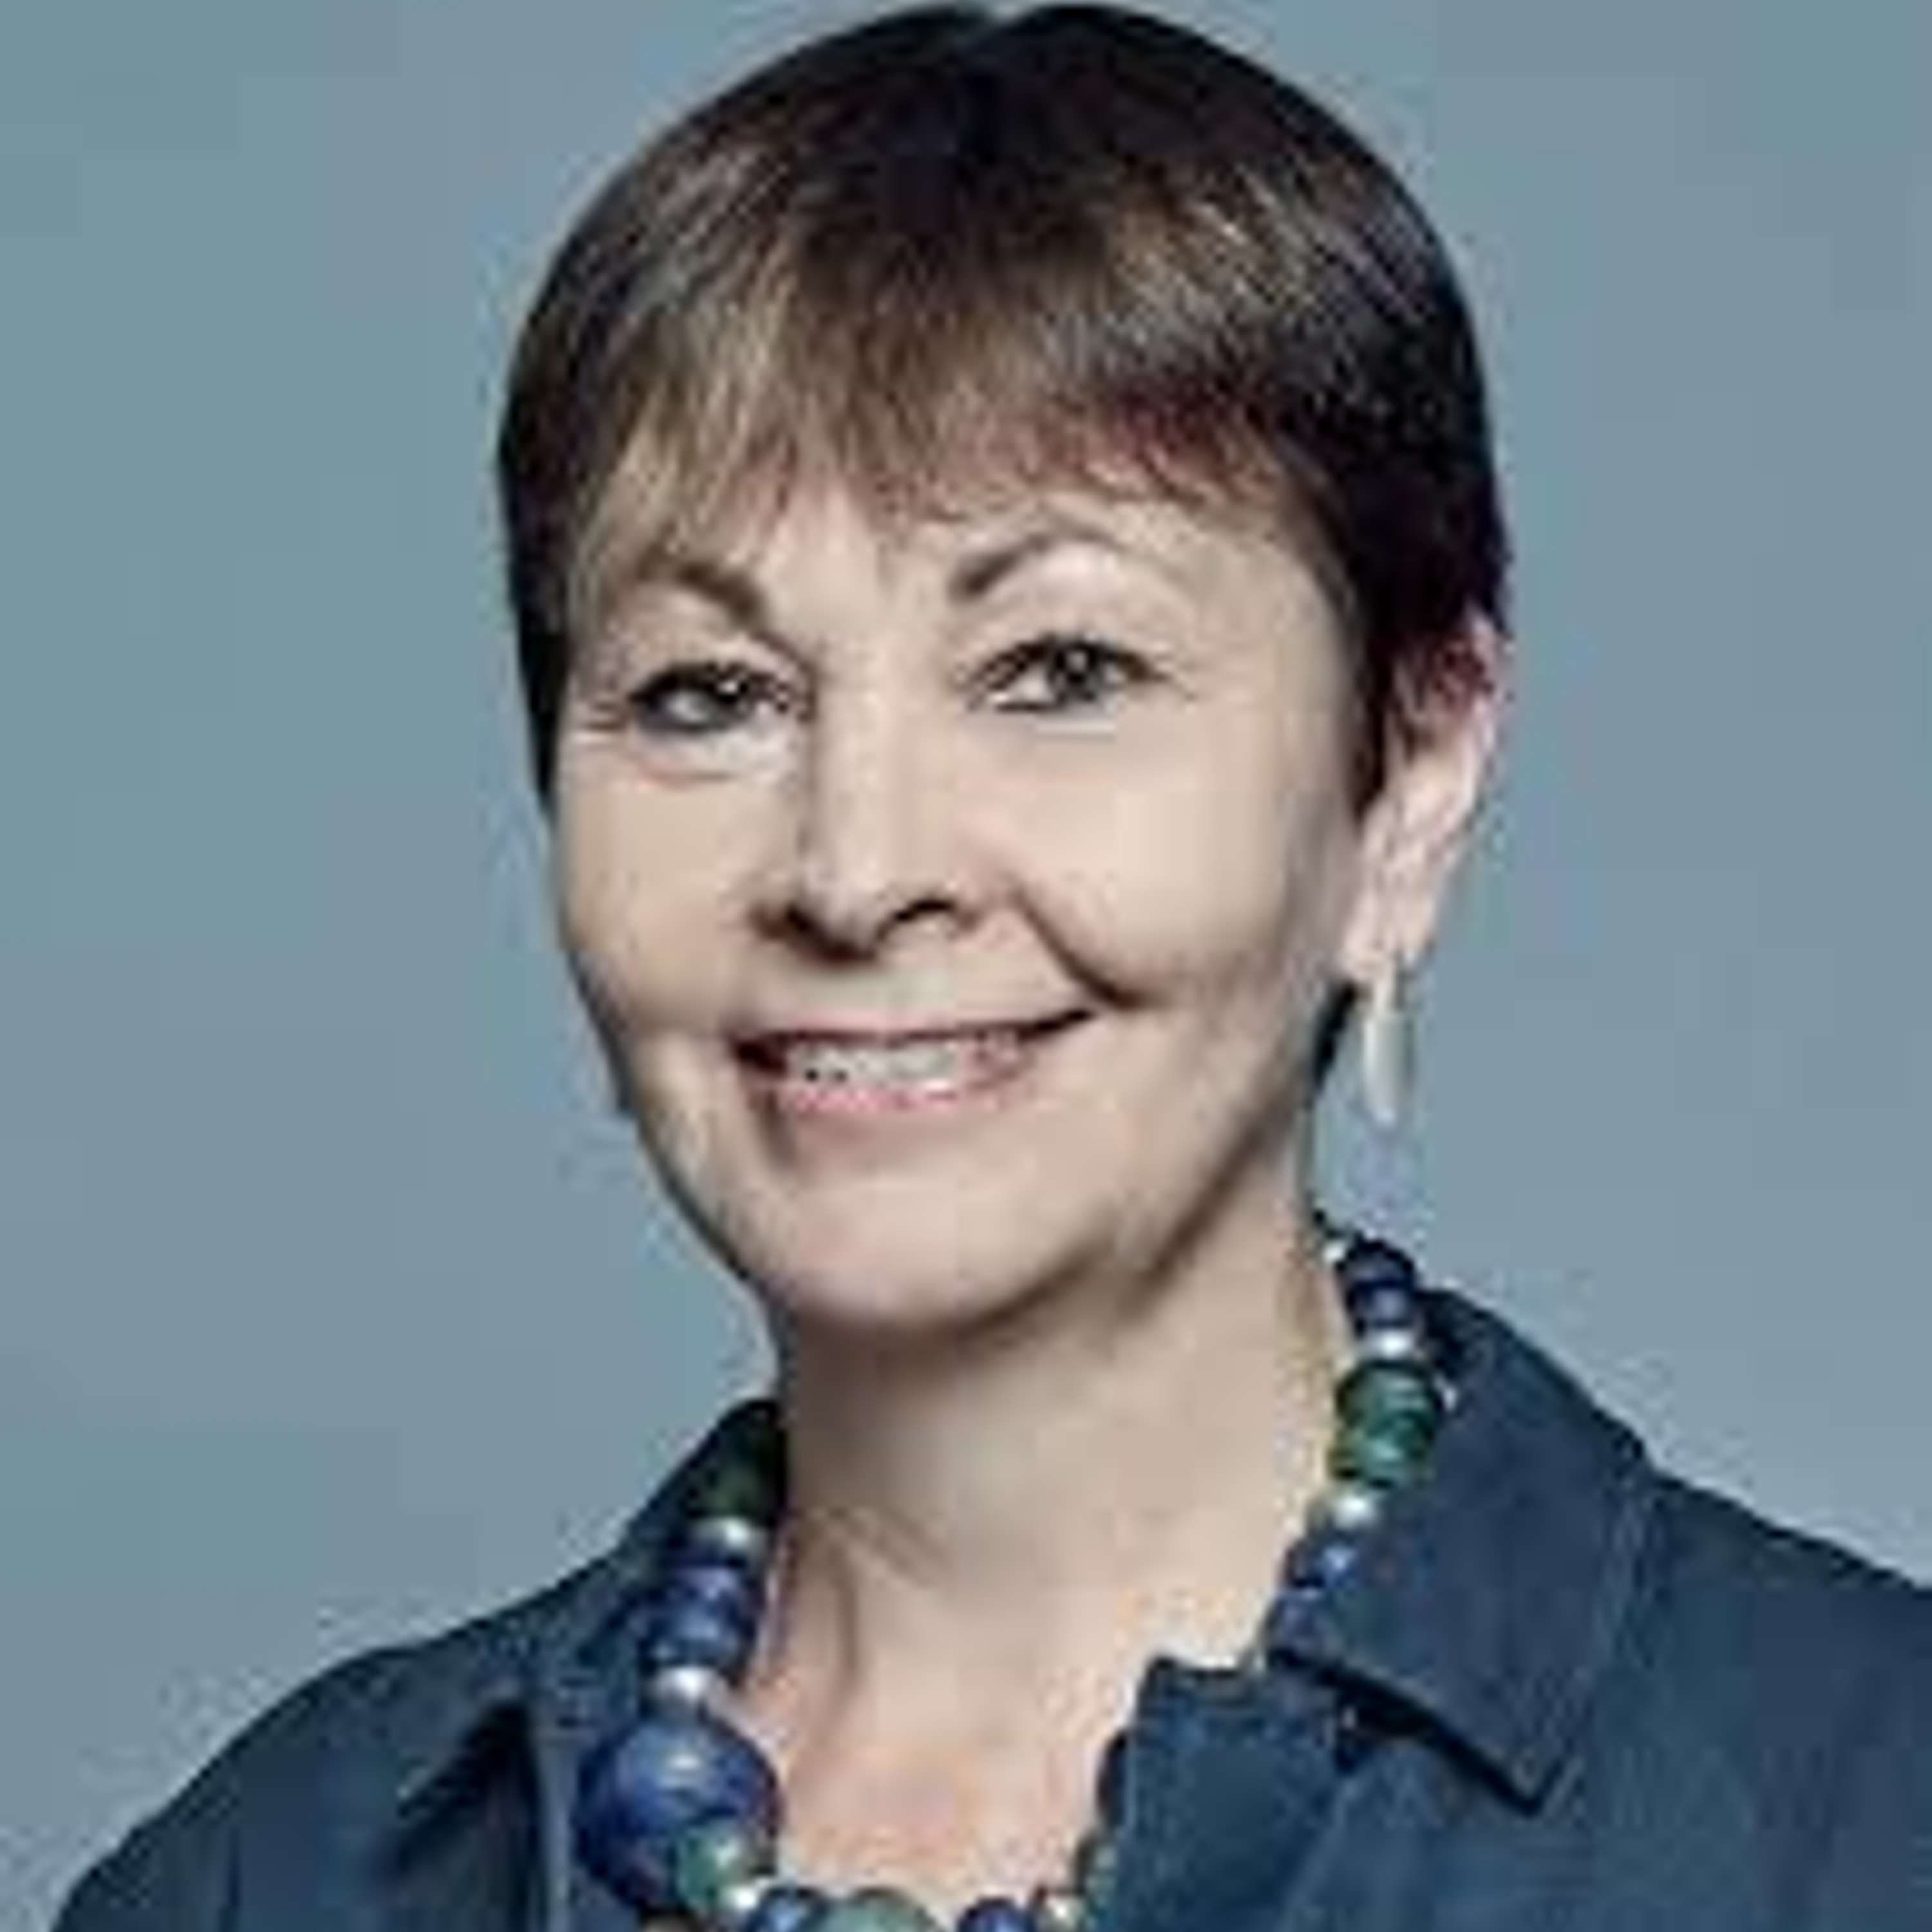 Episode 74: Interview with Caroline Lucas, Green Party member of UK House of Commons